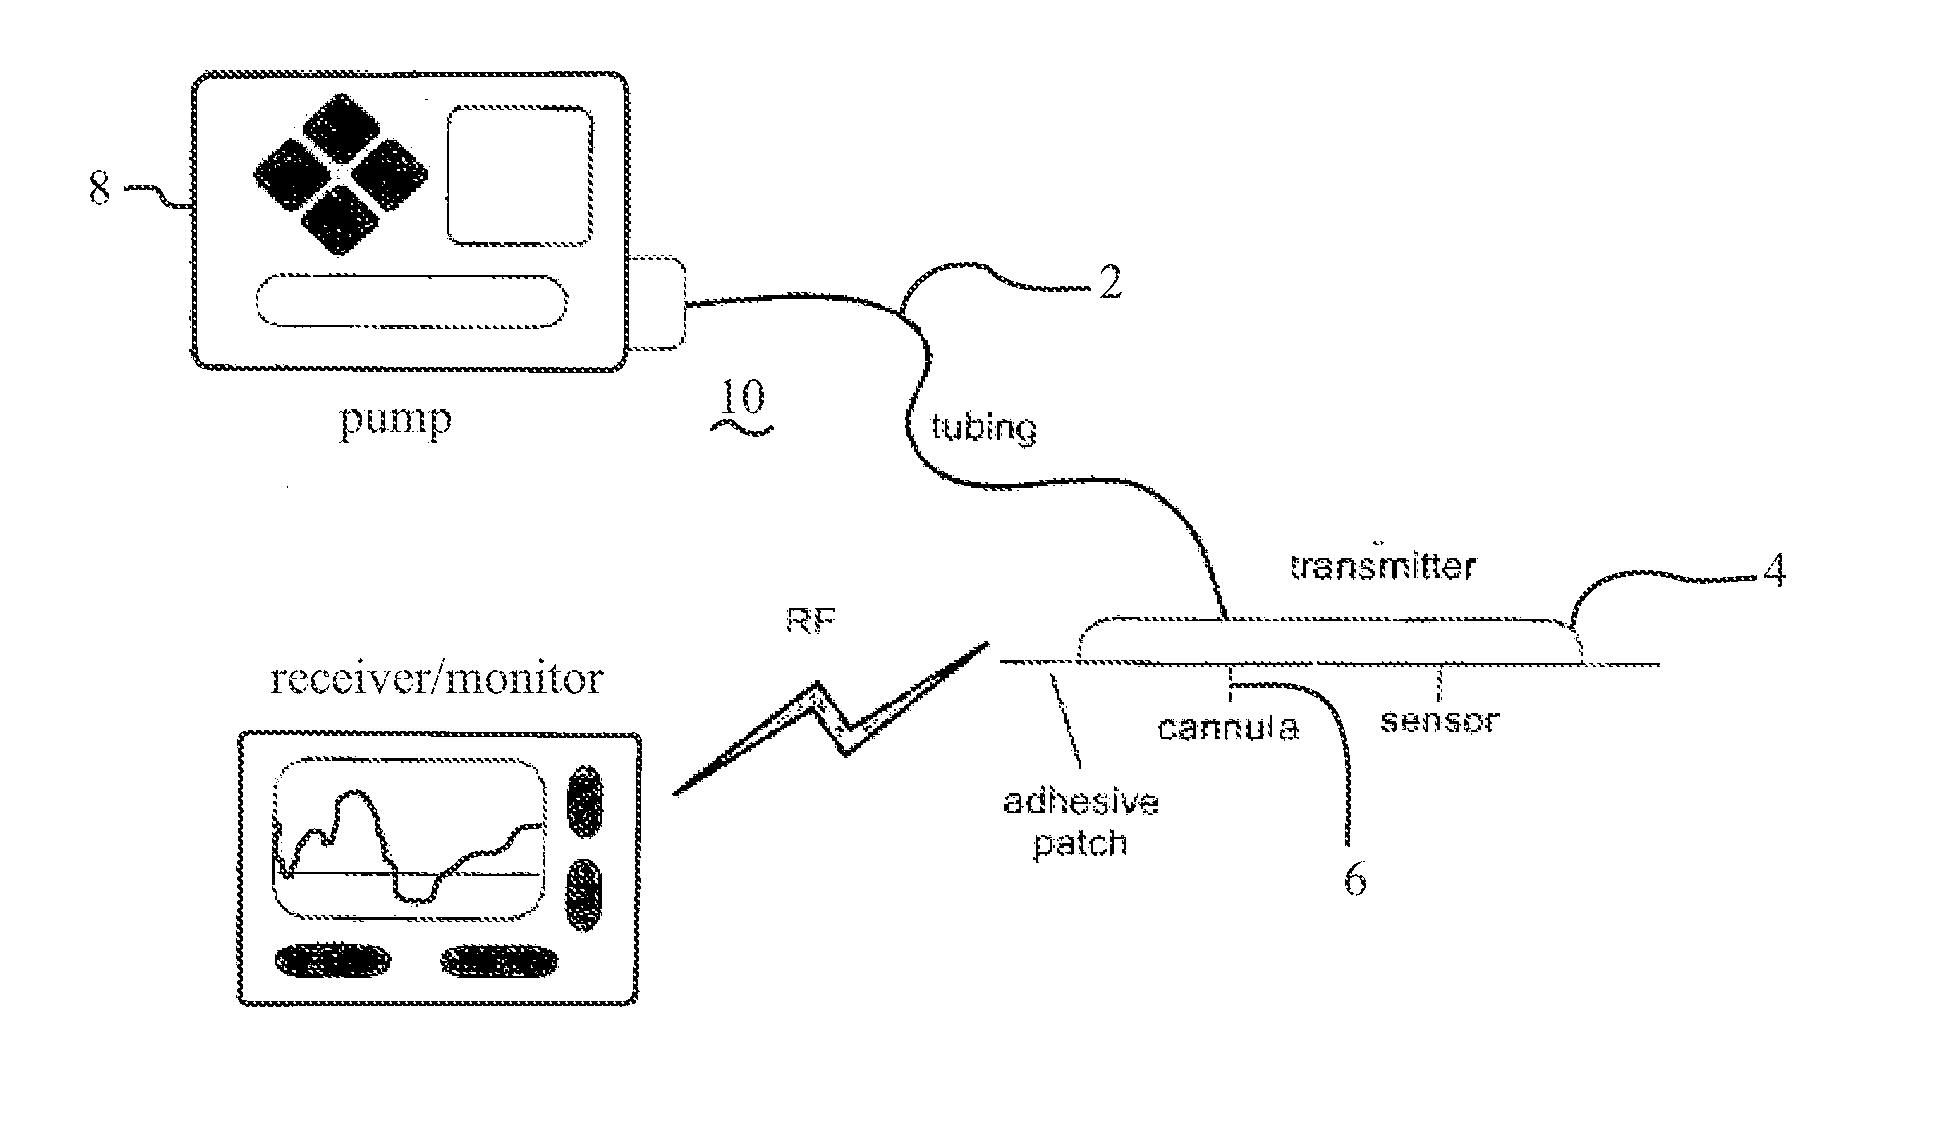 Infusion Sets for the Delivery of a Therapeutic Substance to a Patient